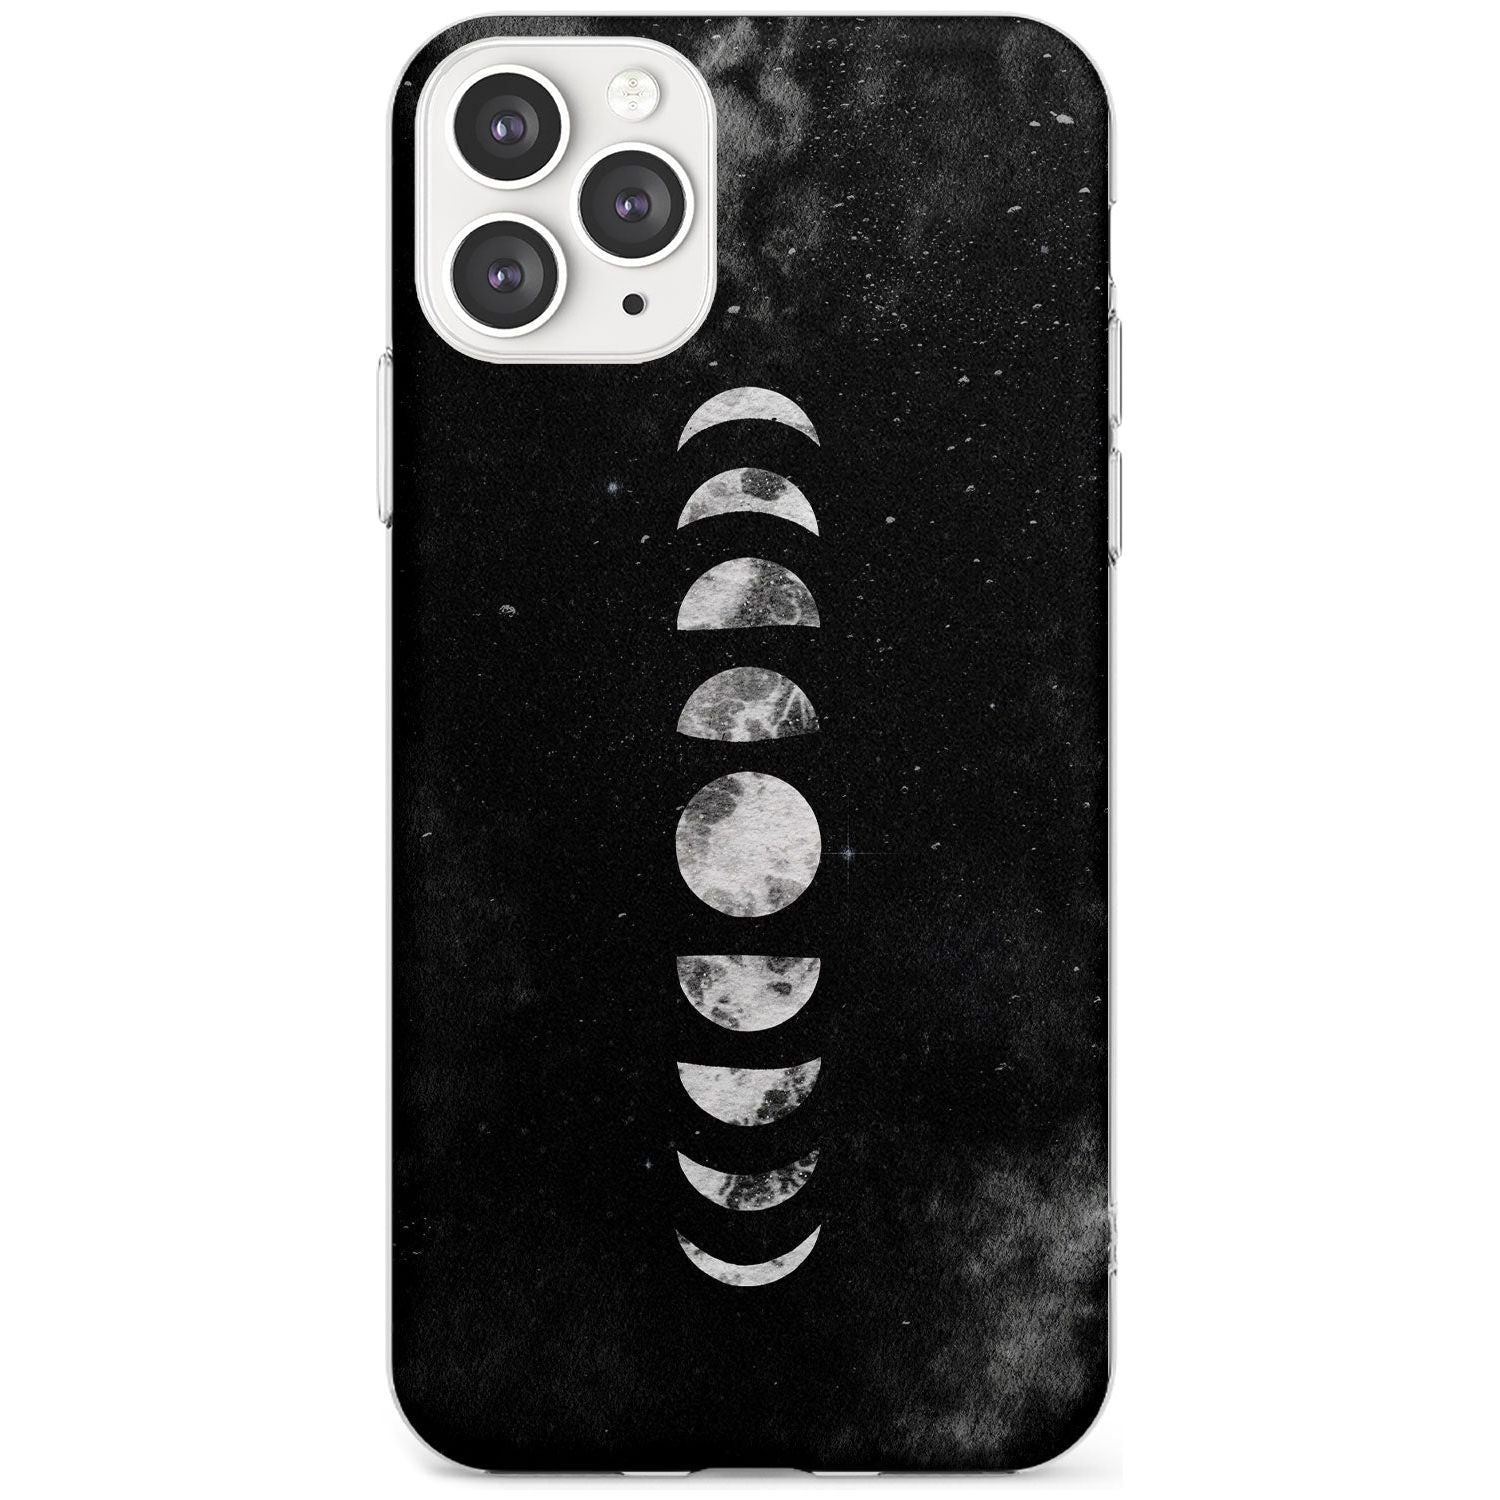 Watercolour Moon Phases Slim TPU Phone Case for iPhone 11 Pro Max